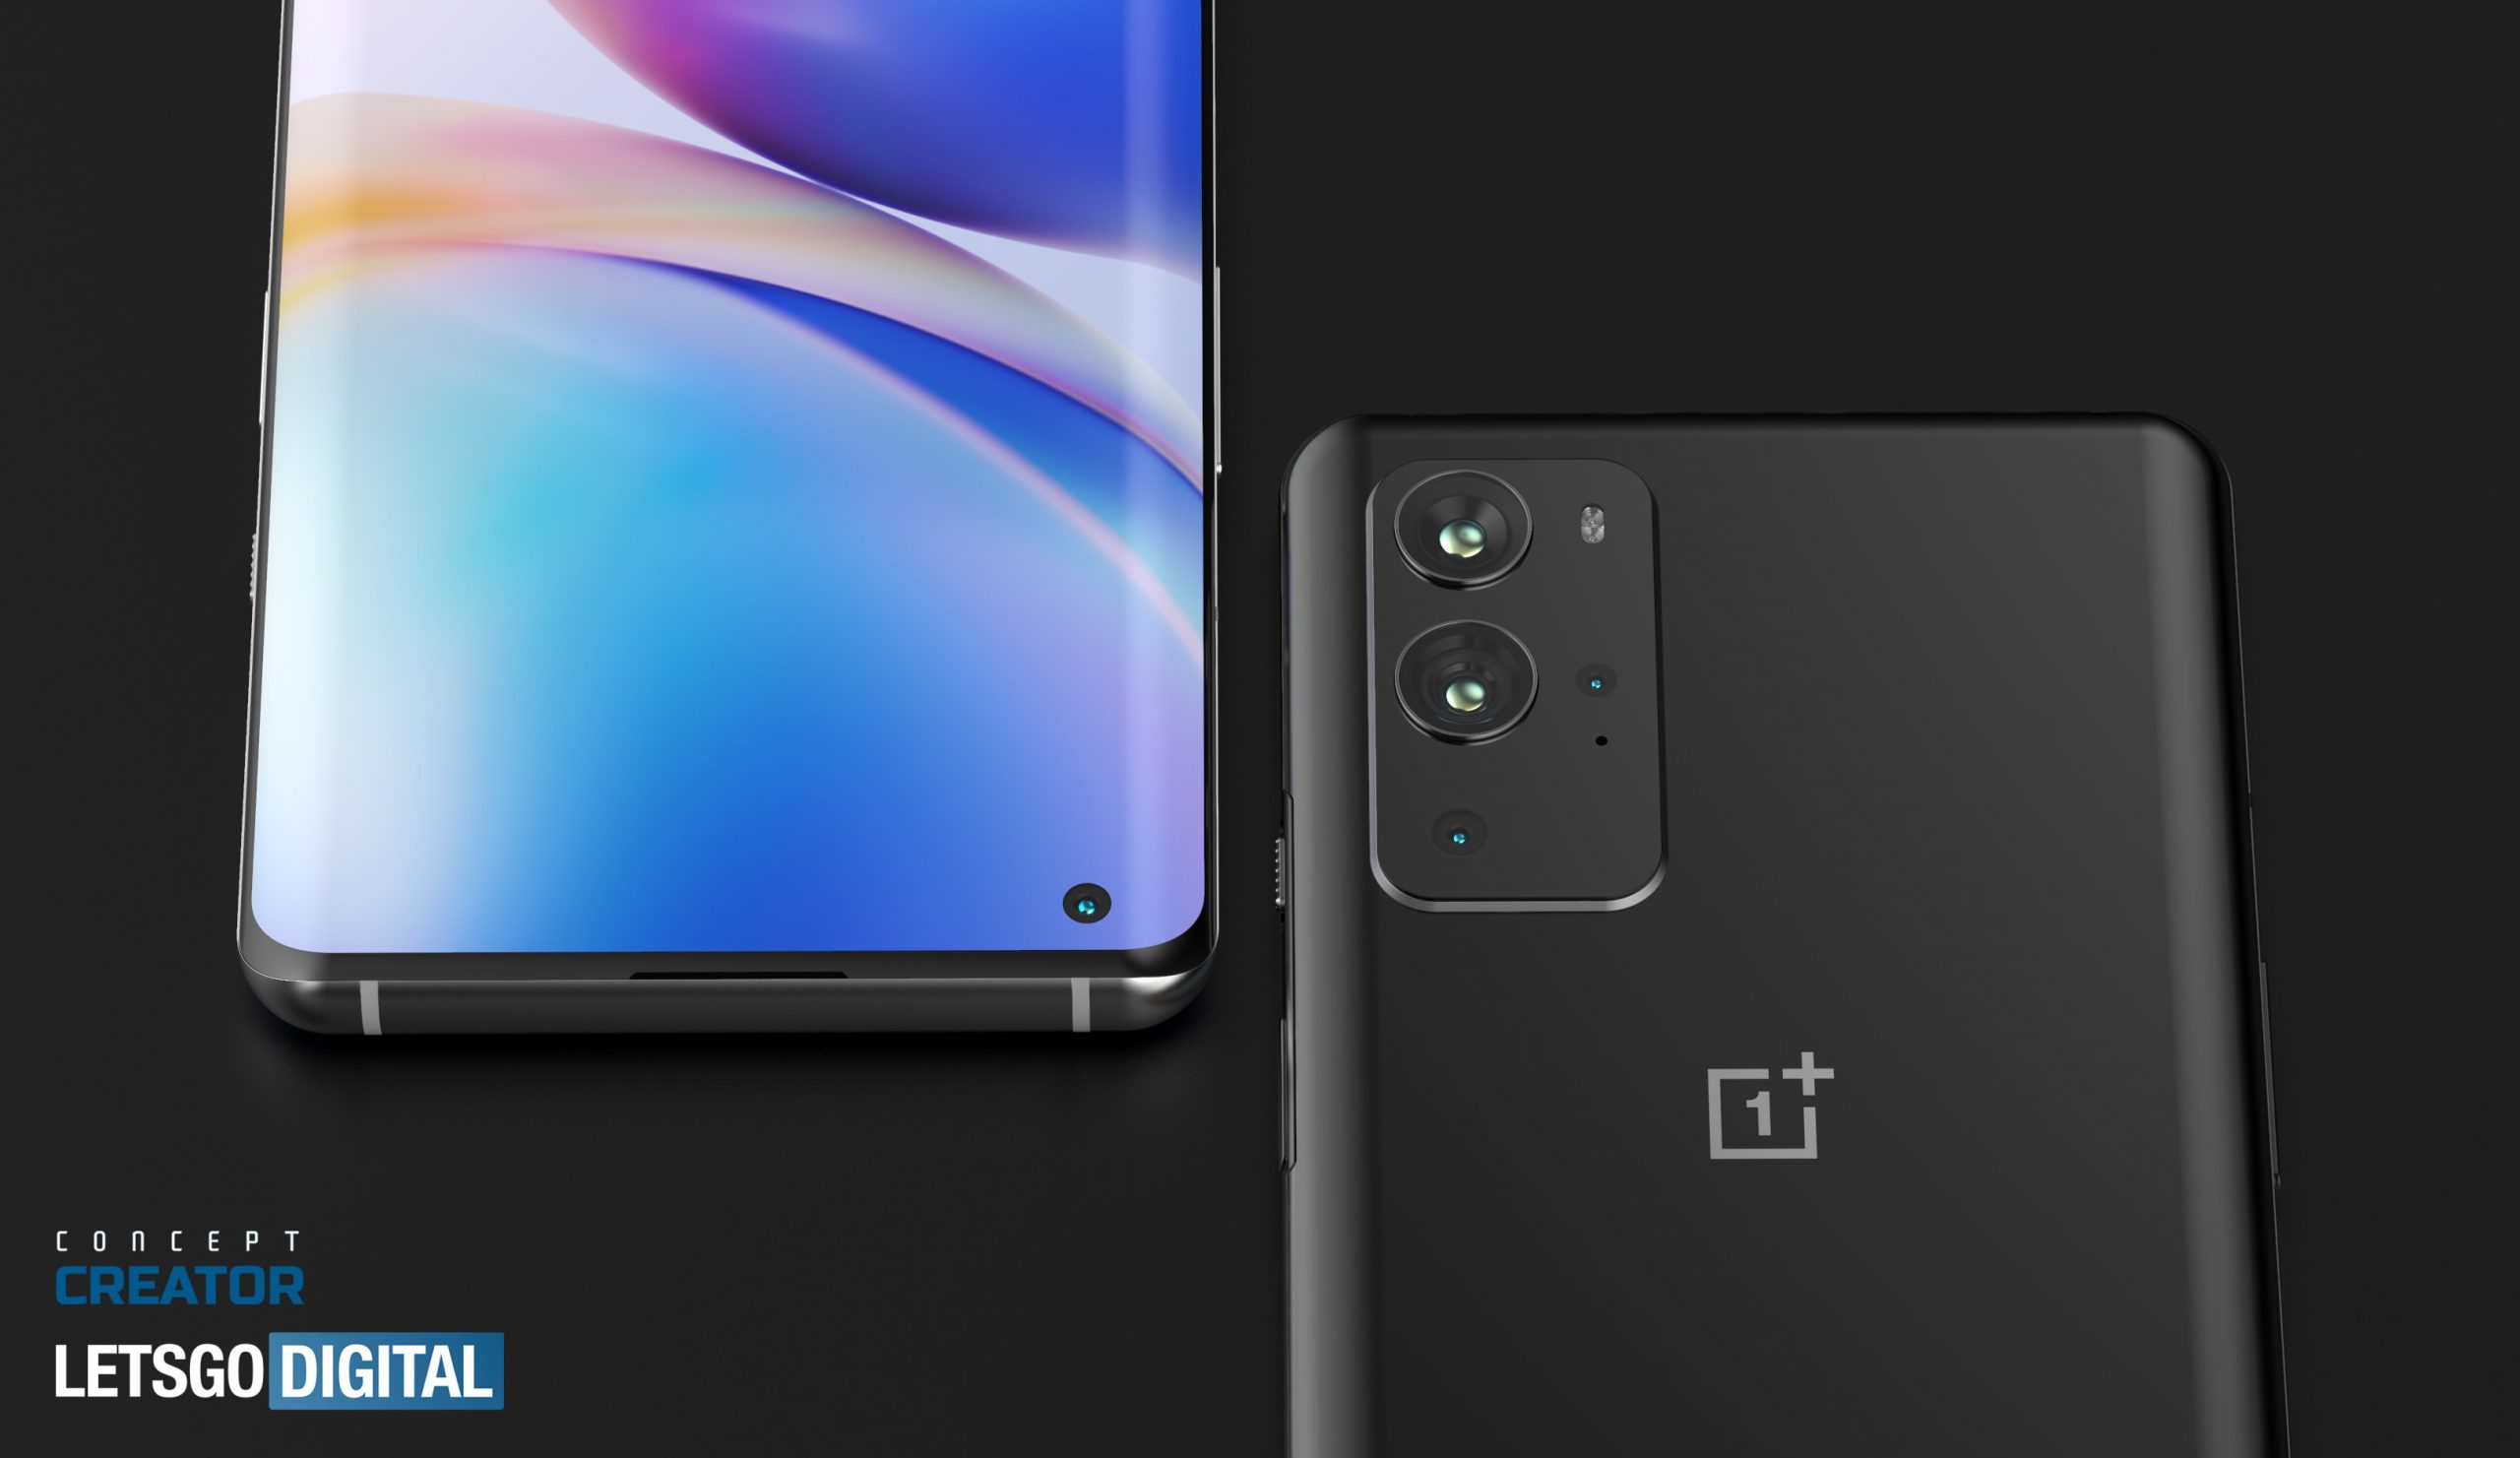 New OnePlus 9 Pro renders showcase the design in detail